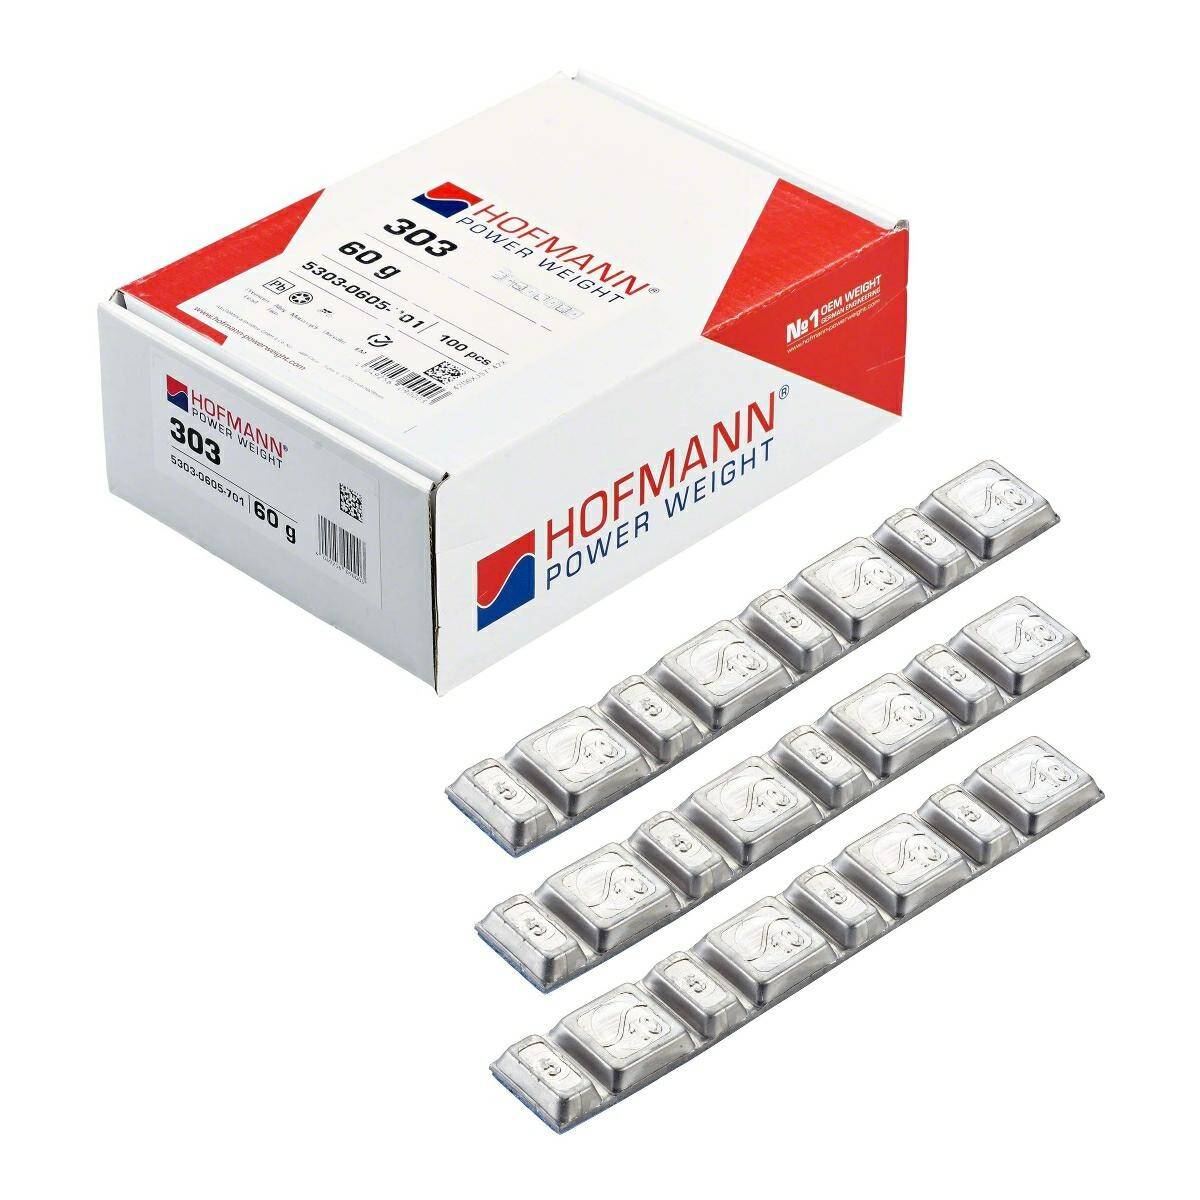 Adhesive Lead Weight Hofmann STANDARD Type 303-2/050 (Pb) 60g 4 x 5 g and 4 x 10 g - pack of 50 (H303-2/050)